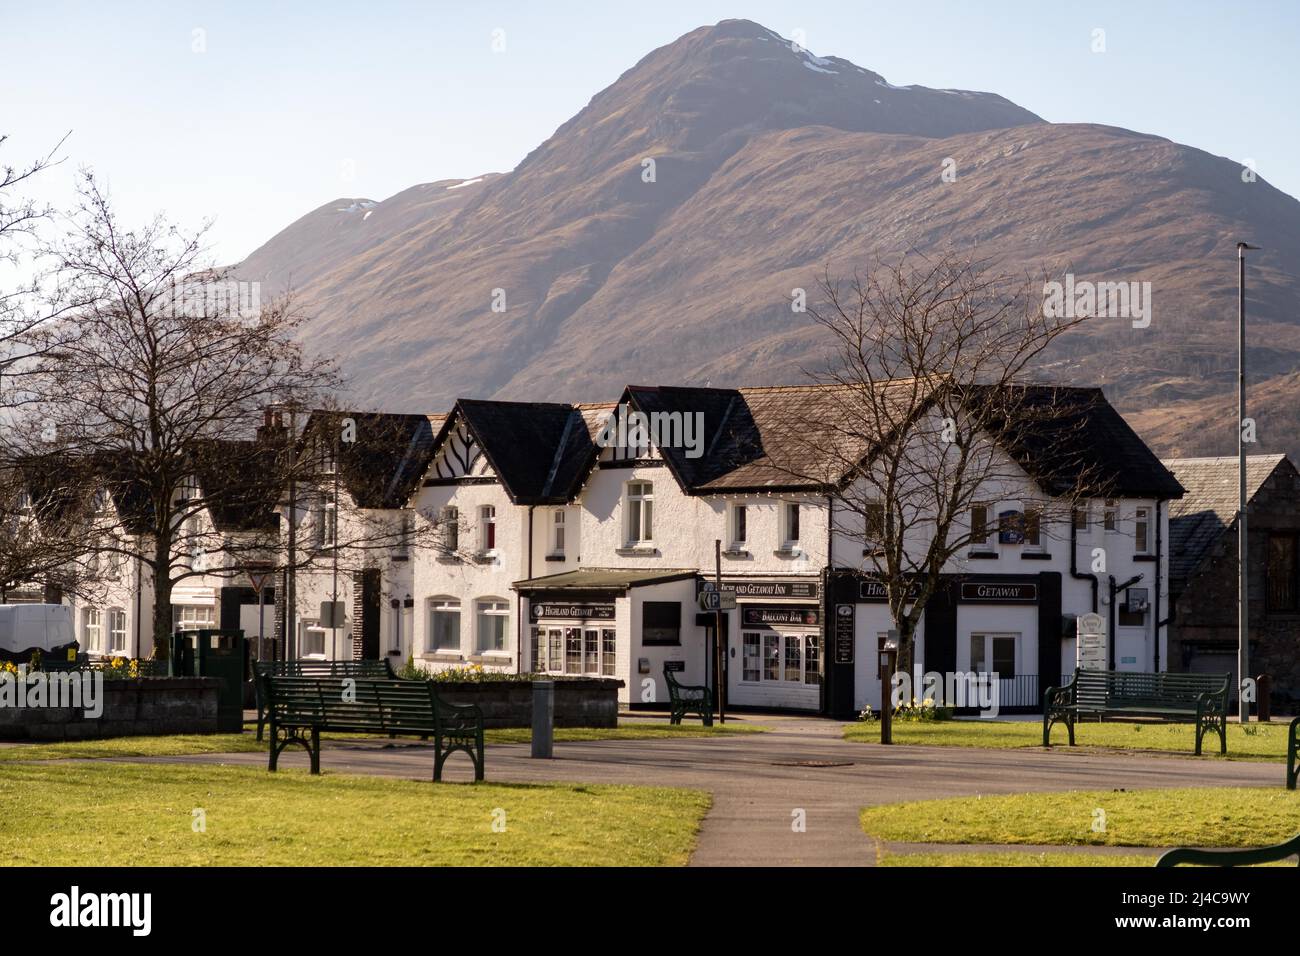 A view of Kinlochleven, a village located in the Scottish Highlands along the West Highland Way. Stock Photo